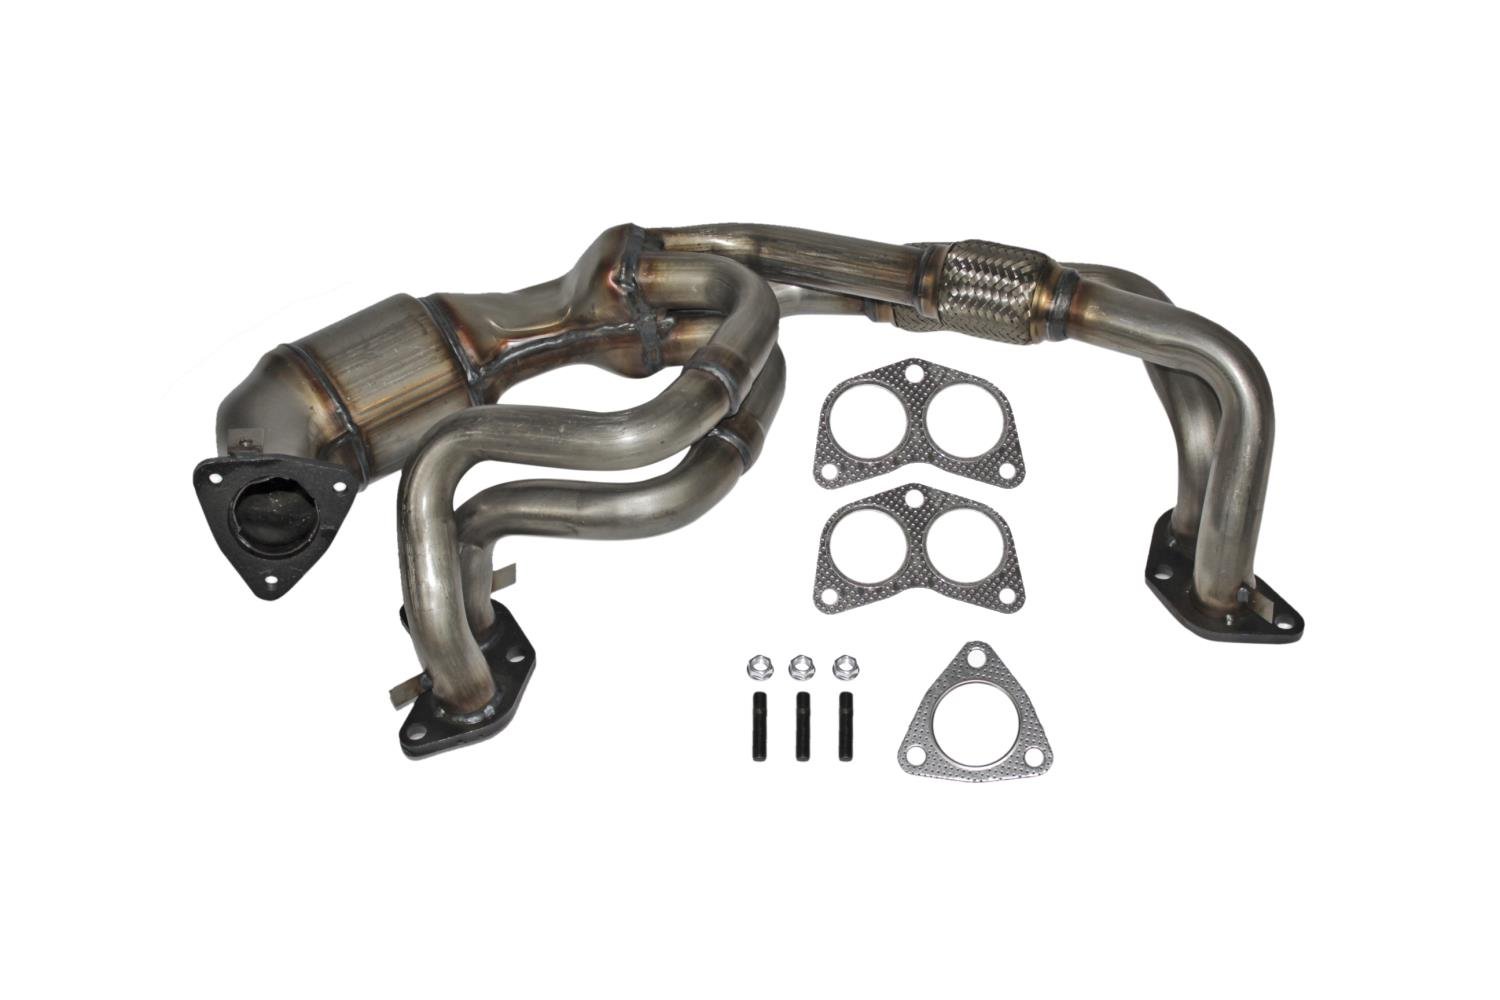 Catalytic Converter Fits 2006-2011 Subaru Impreza, 2006-2010 Forester, 2008-2012 Outback, 2009-2012 Legacy w/2.5L 4 cyl. Eng.